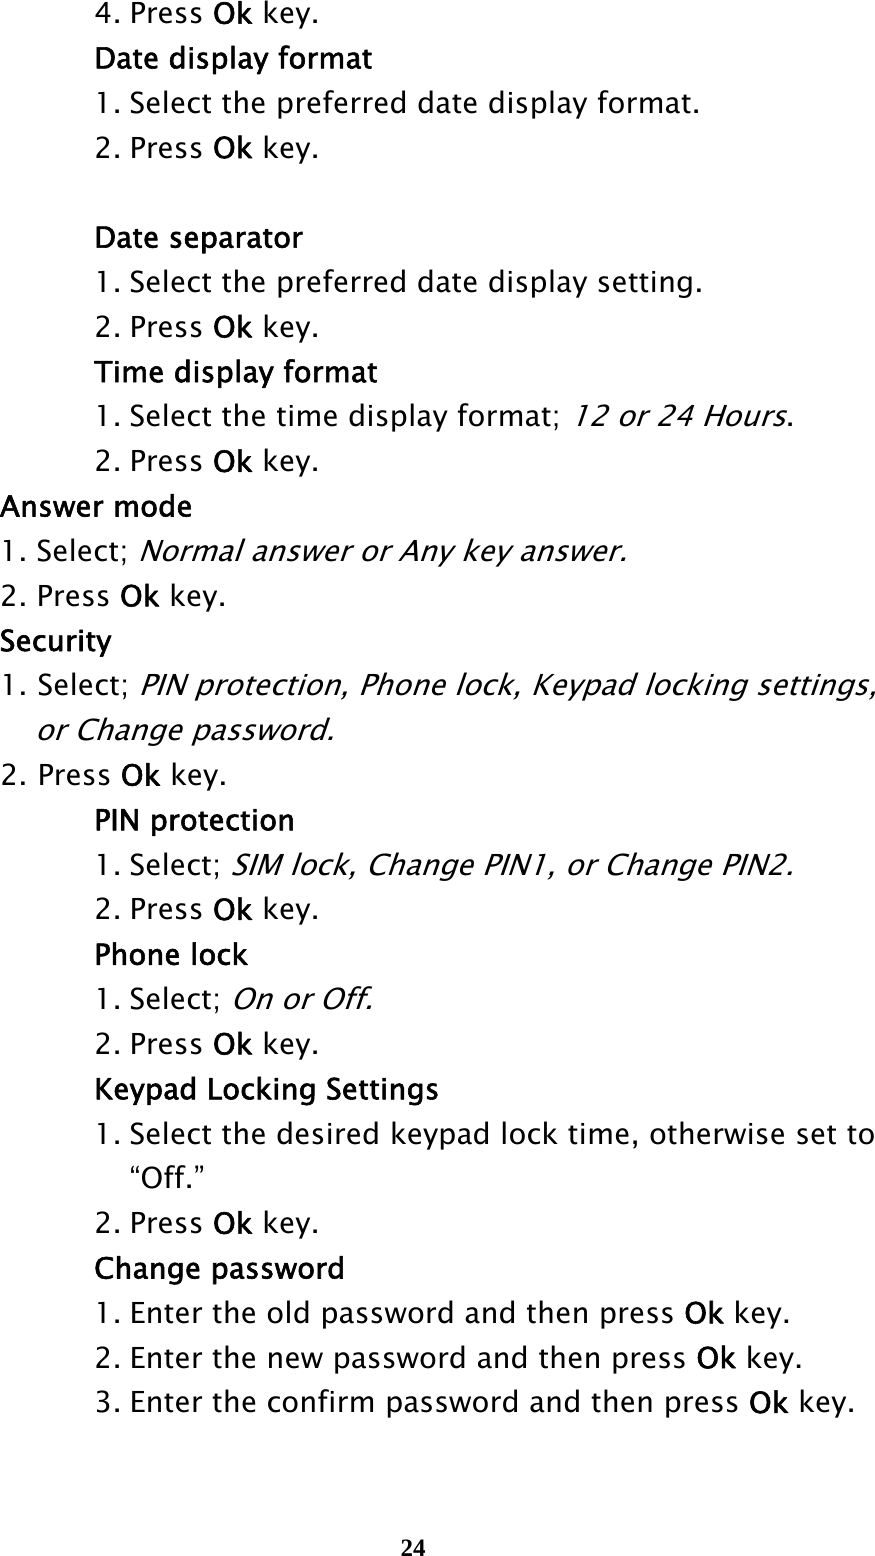  24   4. Press Ok key.       Date display format       1. Select the preferred date display format.    2. Press Ok key.     Date separator       1. Select the preferred date display setting.    2. Press Ok key.       Time display format       1. Select the time display format; 12 or 24 Hours.    2. Press Ok key.  Answer mode  1. Select; Normal answer or Any key answer.  2. Press Ok key.  Security 1. Select; PIN protection, Phone lock, Keypad locking settings,       or Change password. 2. Press Ok key.    PIN protection    1. Select; SIM lock, Change PIN1, or Change PIN2.    2. Press Ok key.    Phone lock    1. Select; On or Off.     2. Press Ok key.    Keypad Locking Settings       1. Select the desired keypad lock time, otherwise set to       “Off.”     2. Press Ok key.    Change password       1. Enter the old password and then press Ok key.       2. Enter the new password and then press Ok key.       3. Enter the confirm password and then press Ok key.  